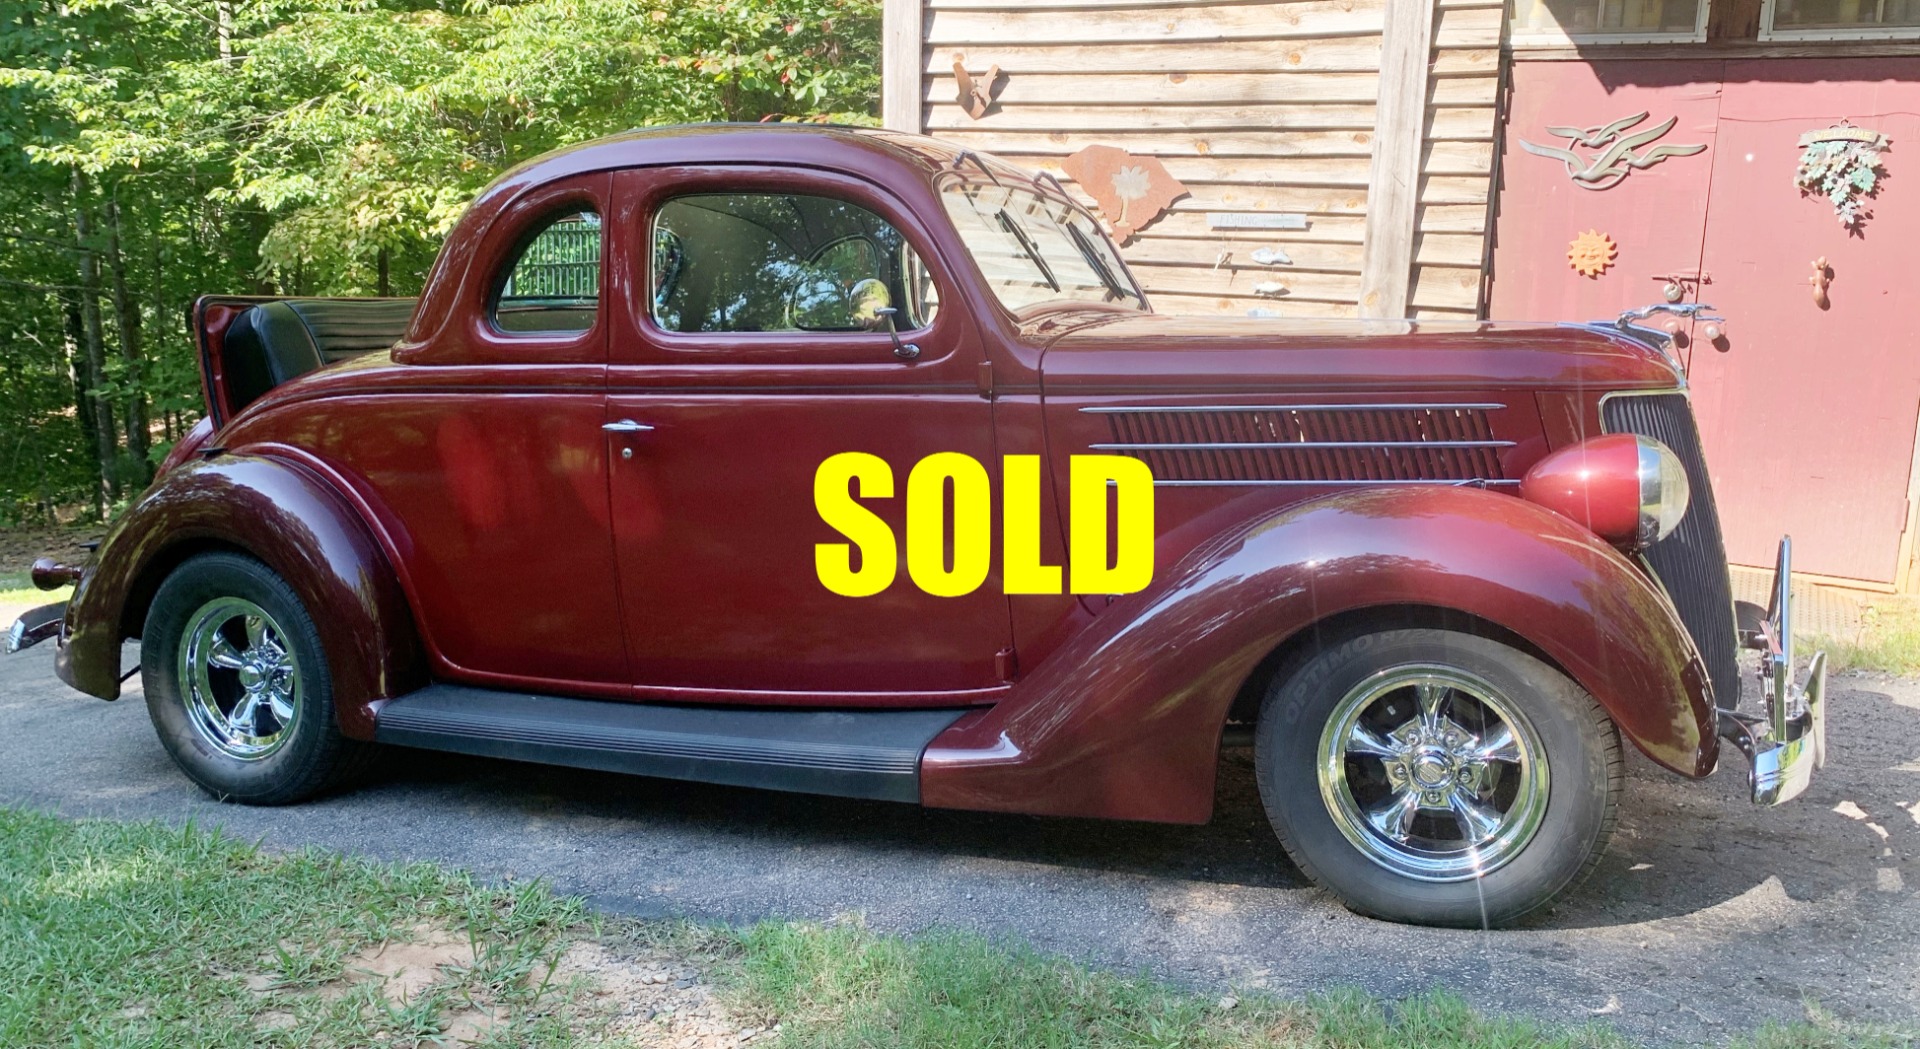 Used 1936 Ford 5 Window Rumble Seat Coupe